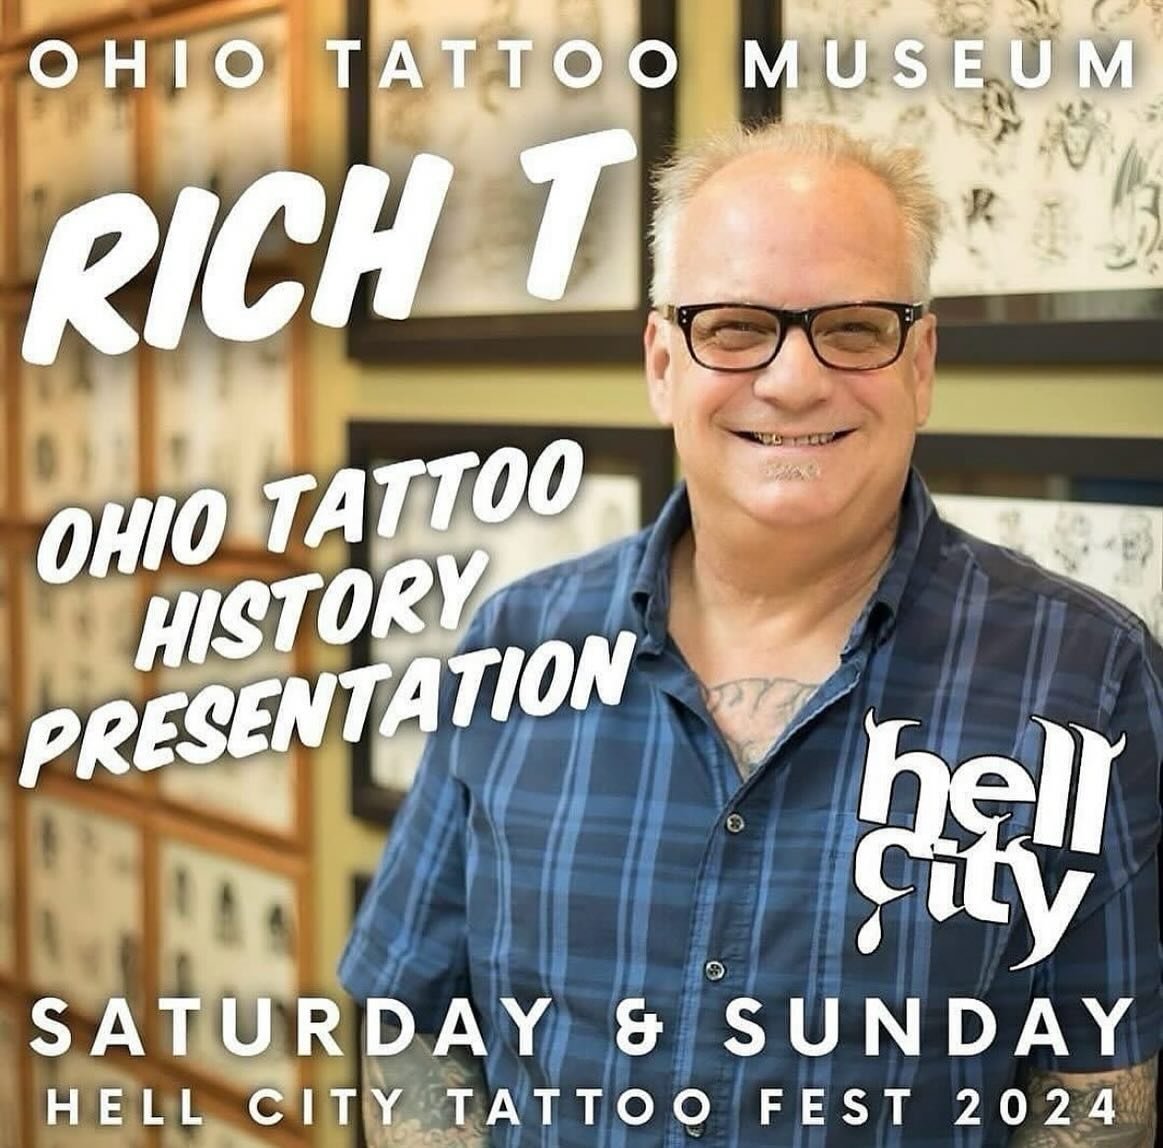 This Friday May 17th-Sunday May 19th Rich T @rich_t_tattoos , Gabe @gabriel_richmond , and Memphis @tattoosbymemphis will be attending/participating in the Hell City Tattoo festival.

Rich T @rich_t_tattoos will be giving Presentations on Ohio Tattoo